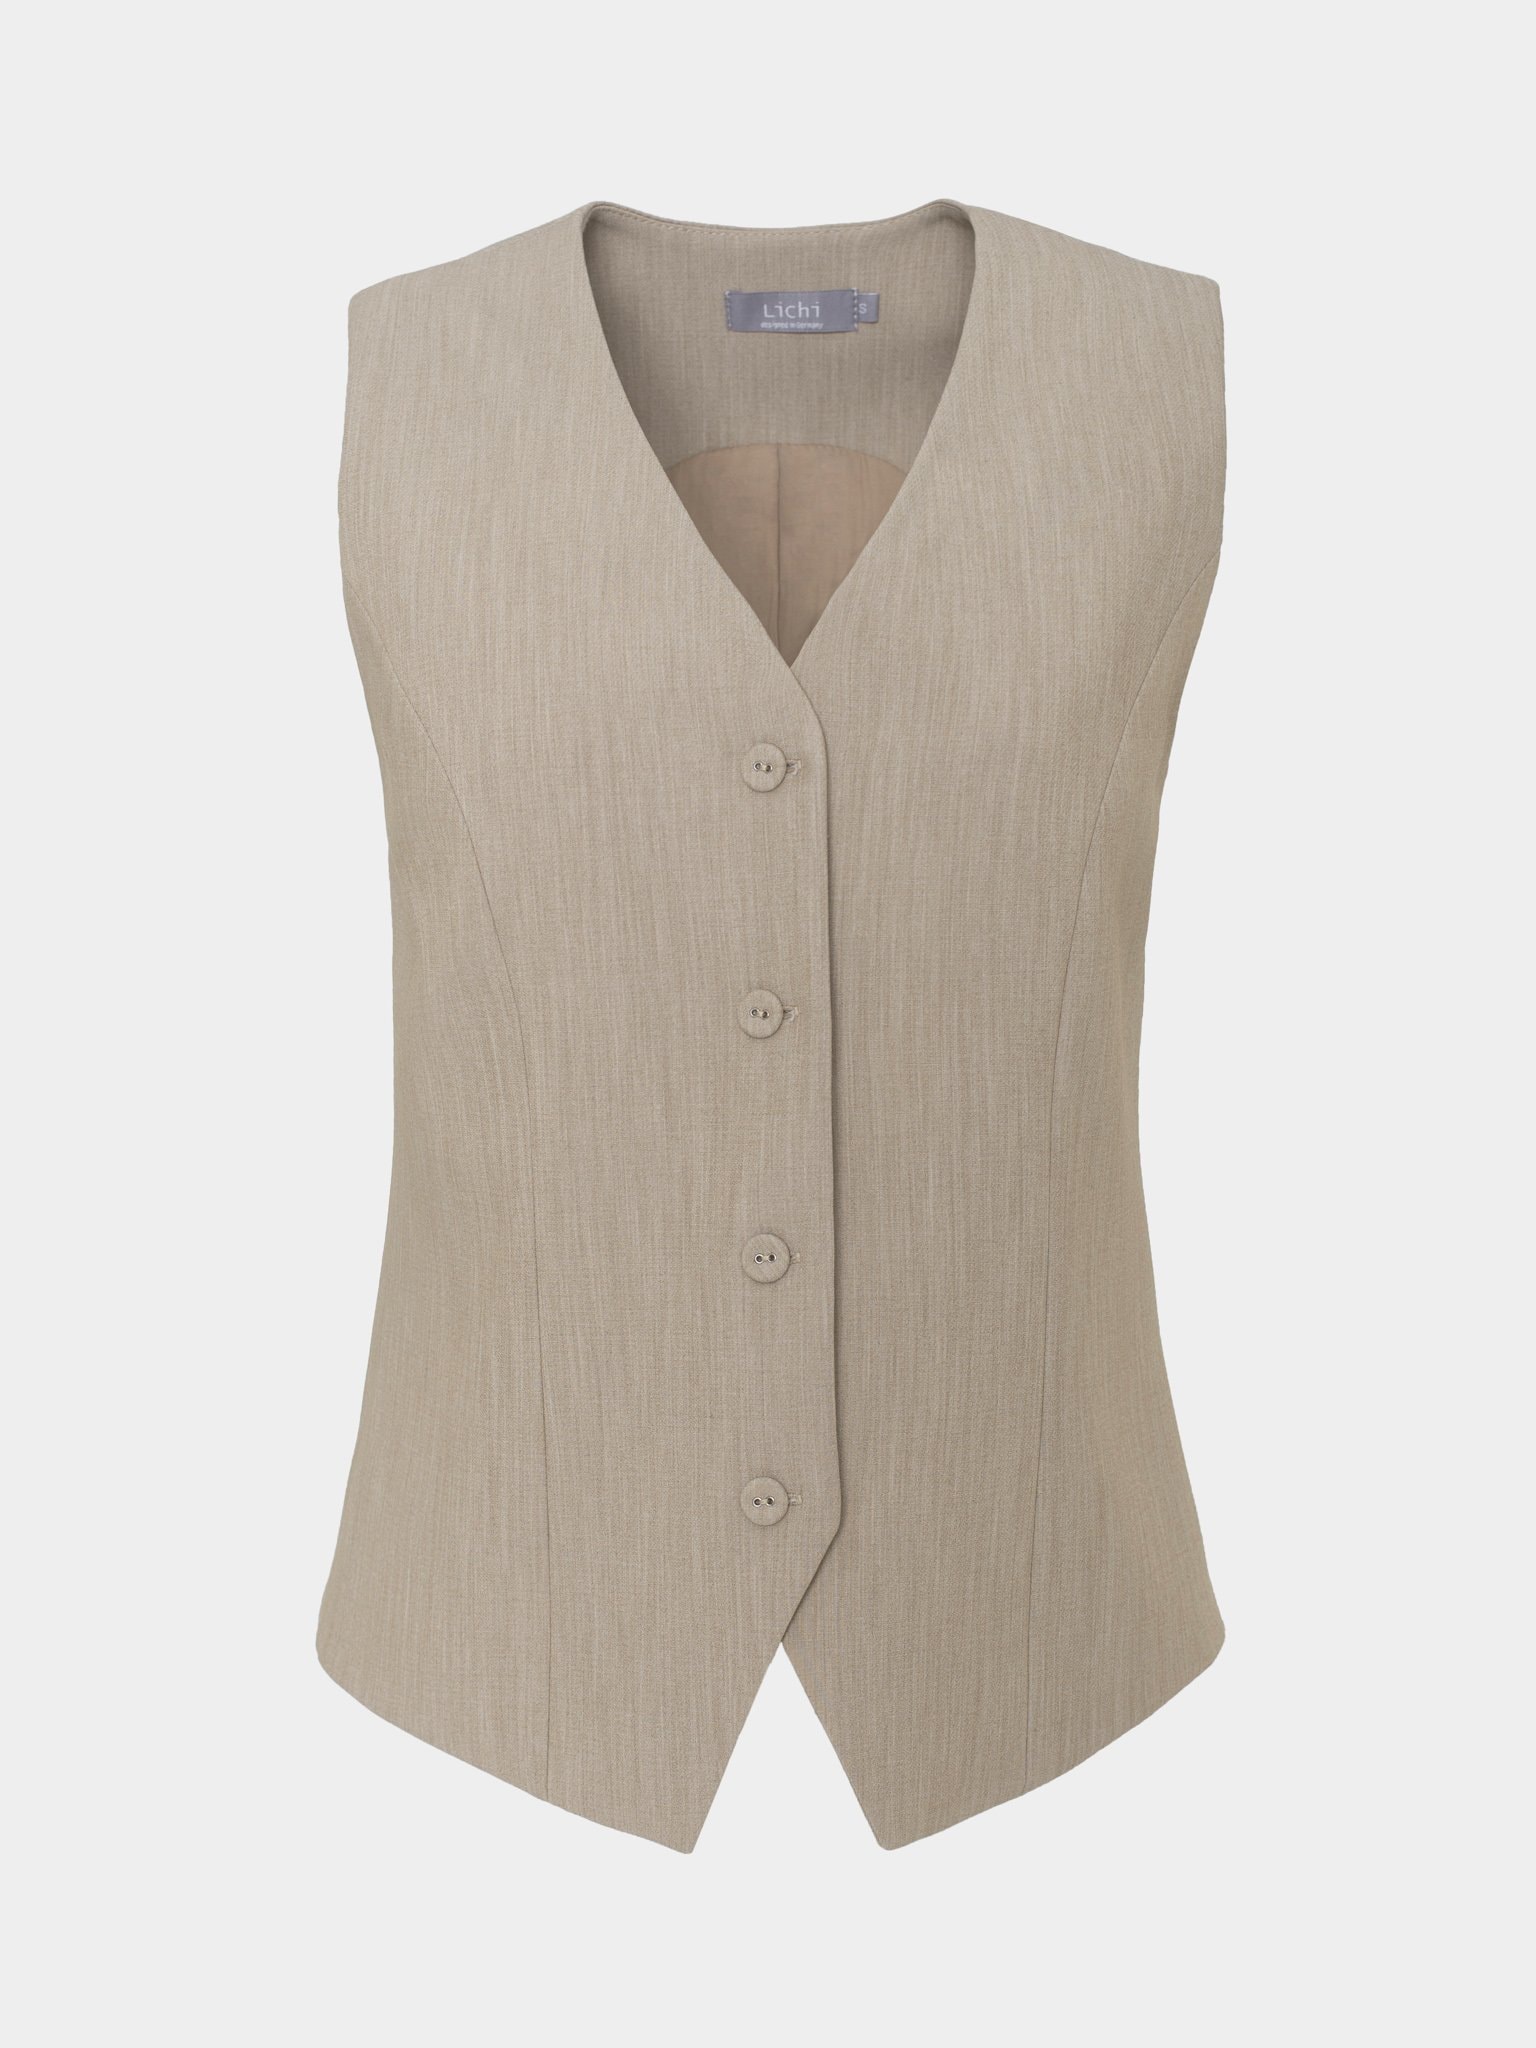 Classic single-breasted vest